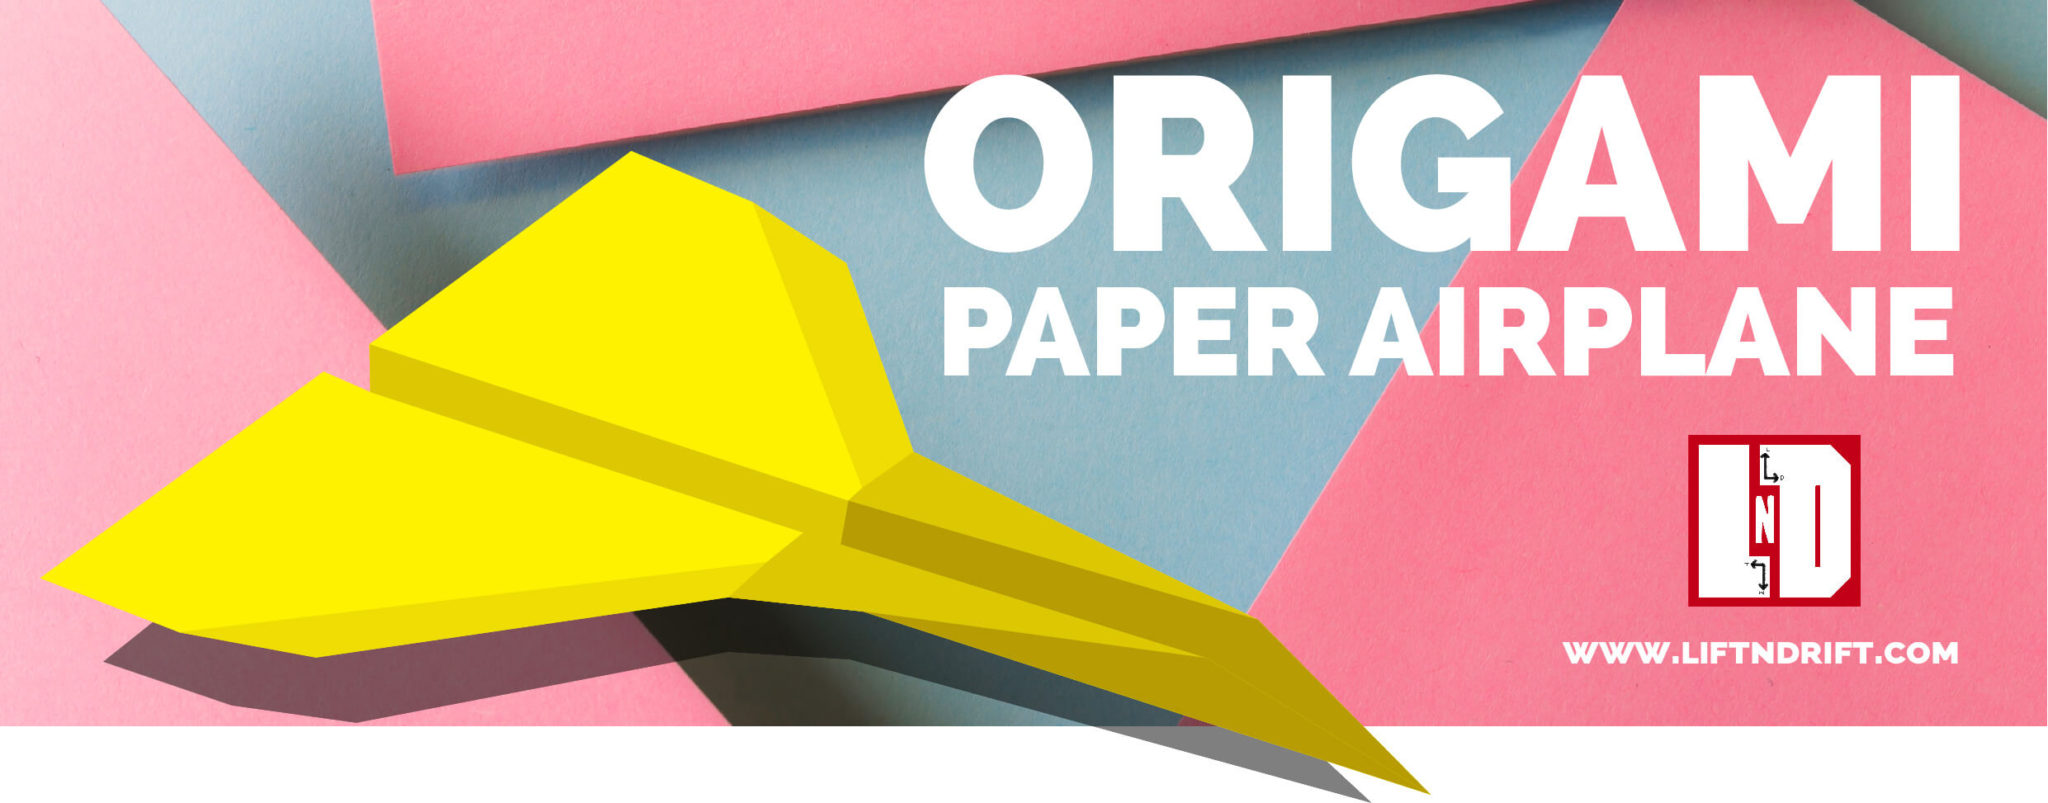 Origami paper plane Learn how to make a Origami paper airplane